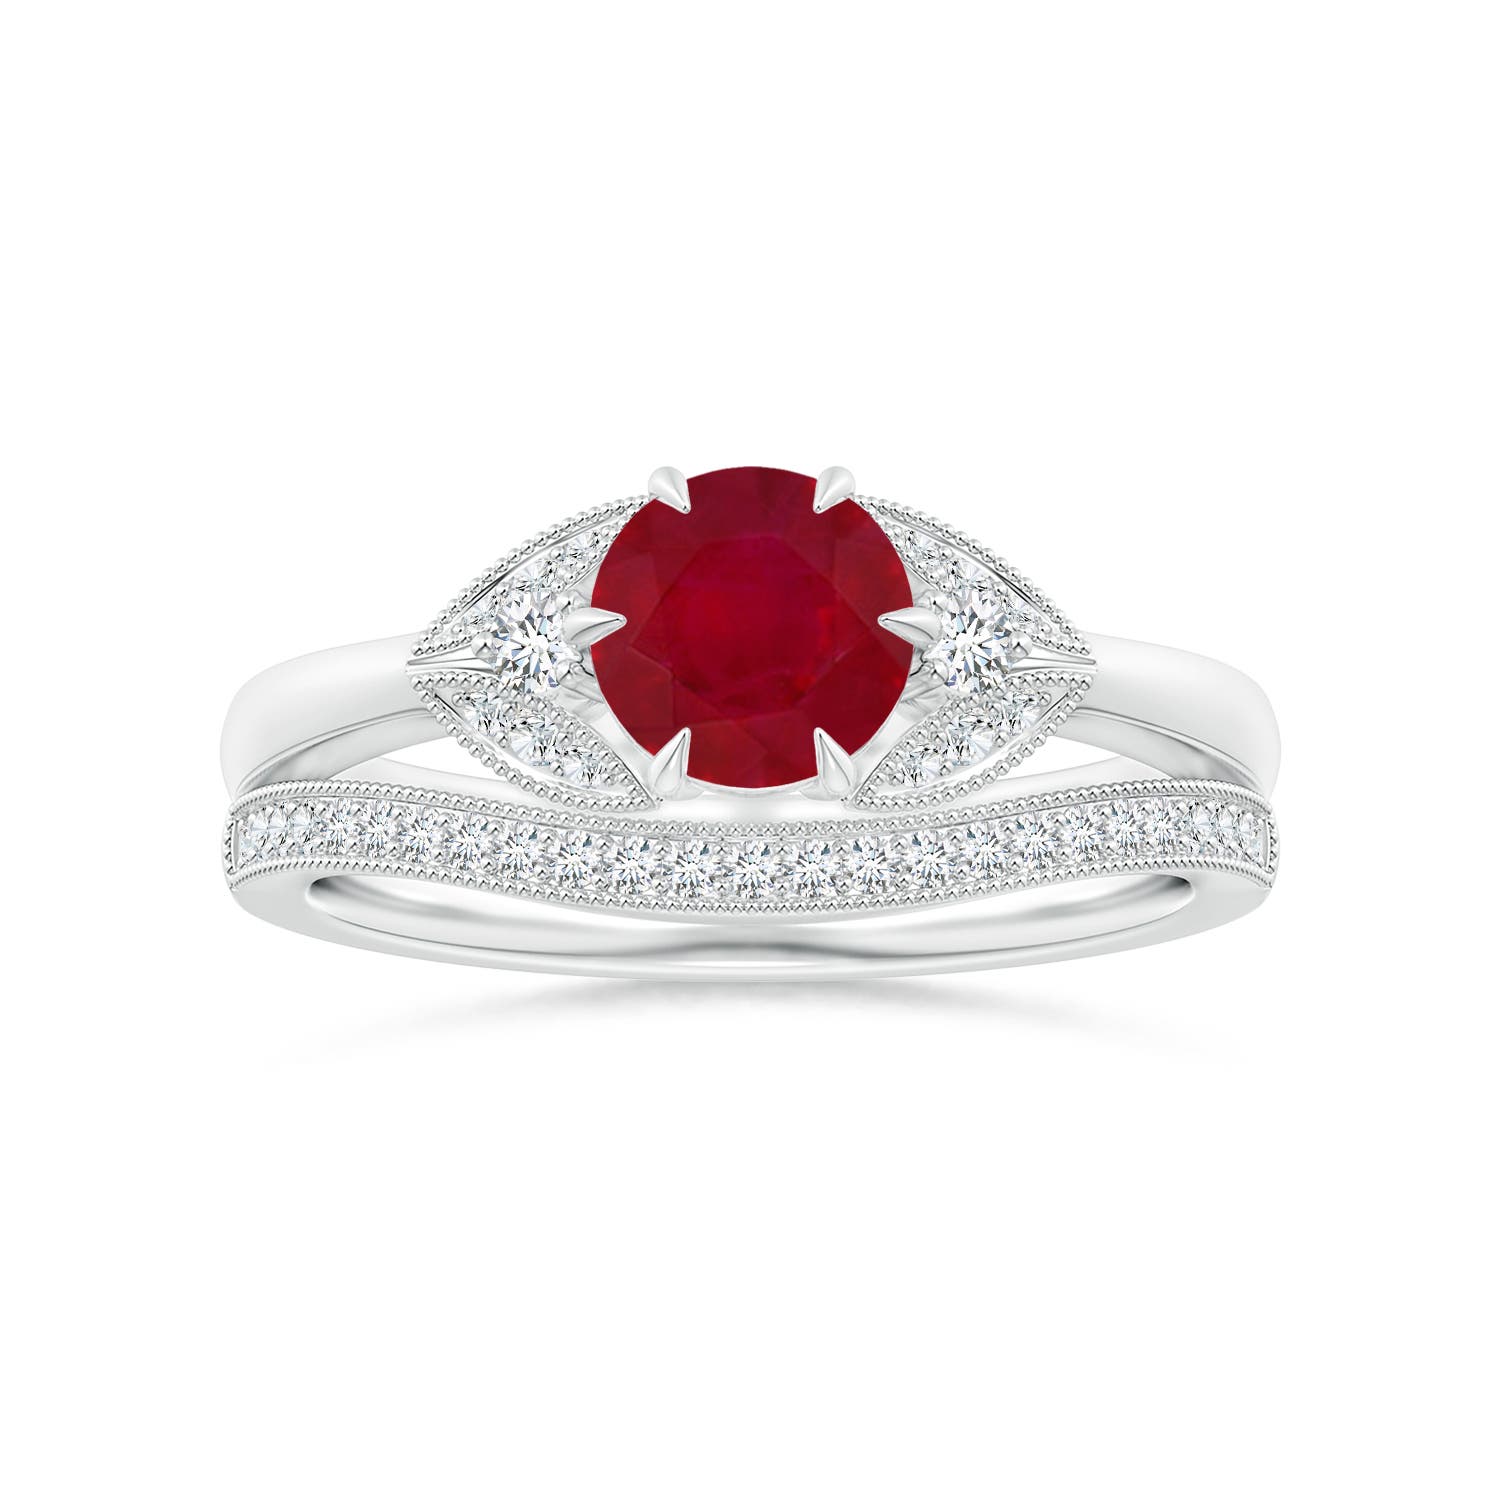 AA - Ruby / 1.1 CT / 14 KT White Gold